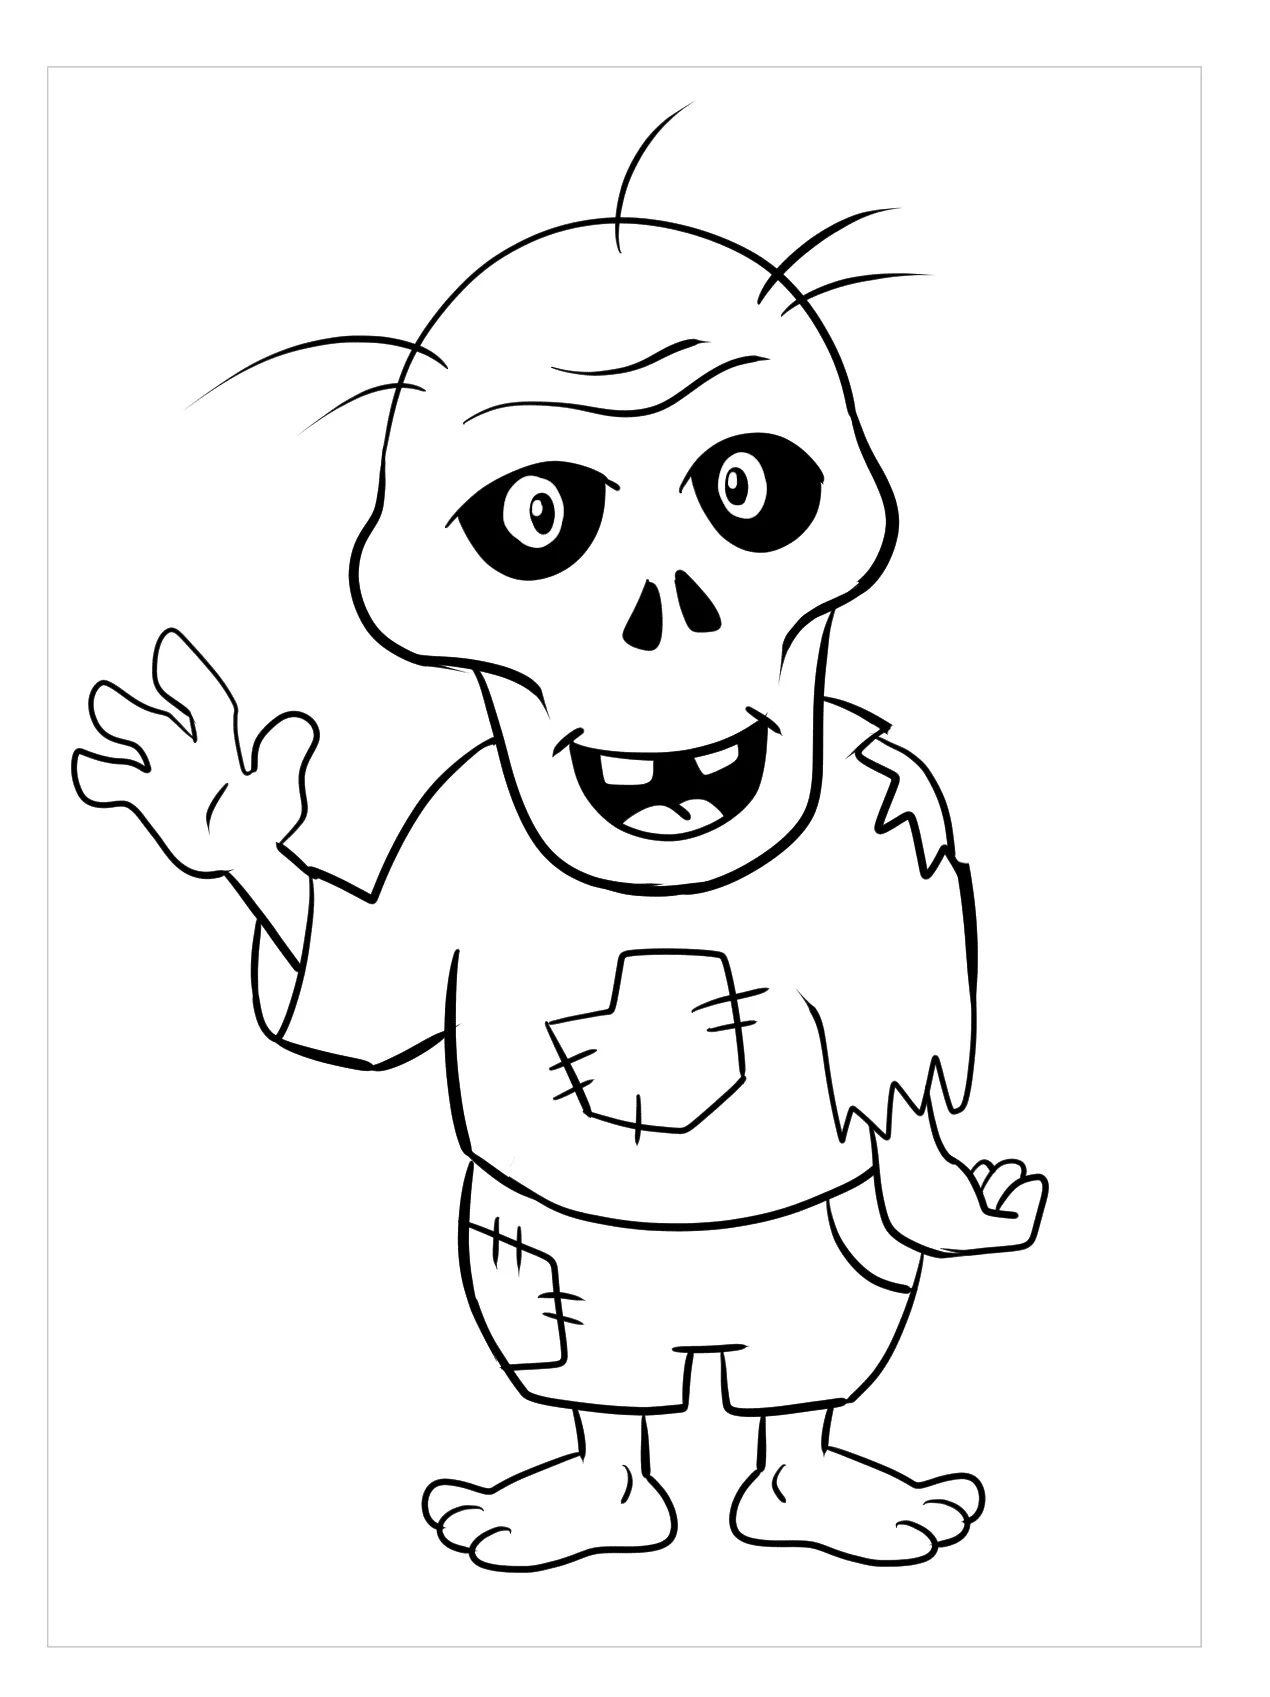 Zombie Coloring Pages For Kids & book for kids.